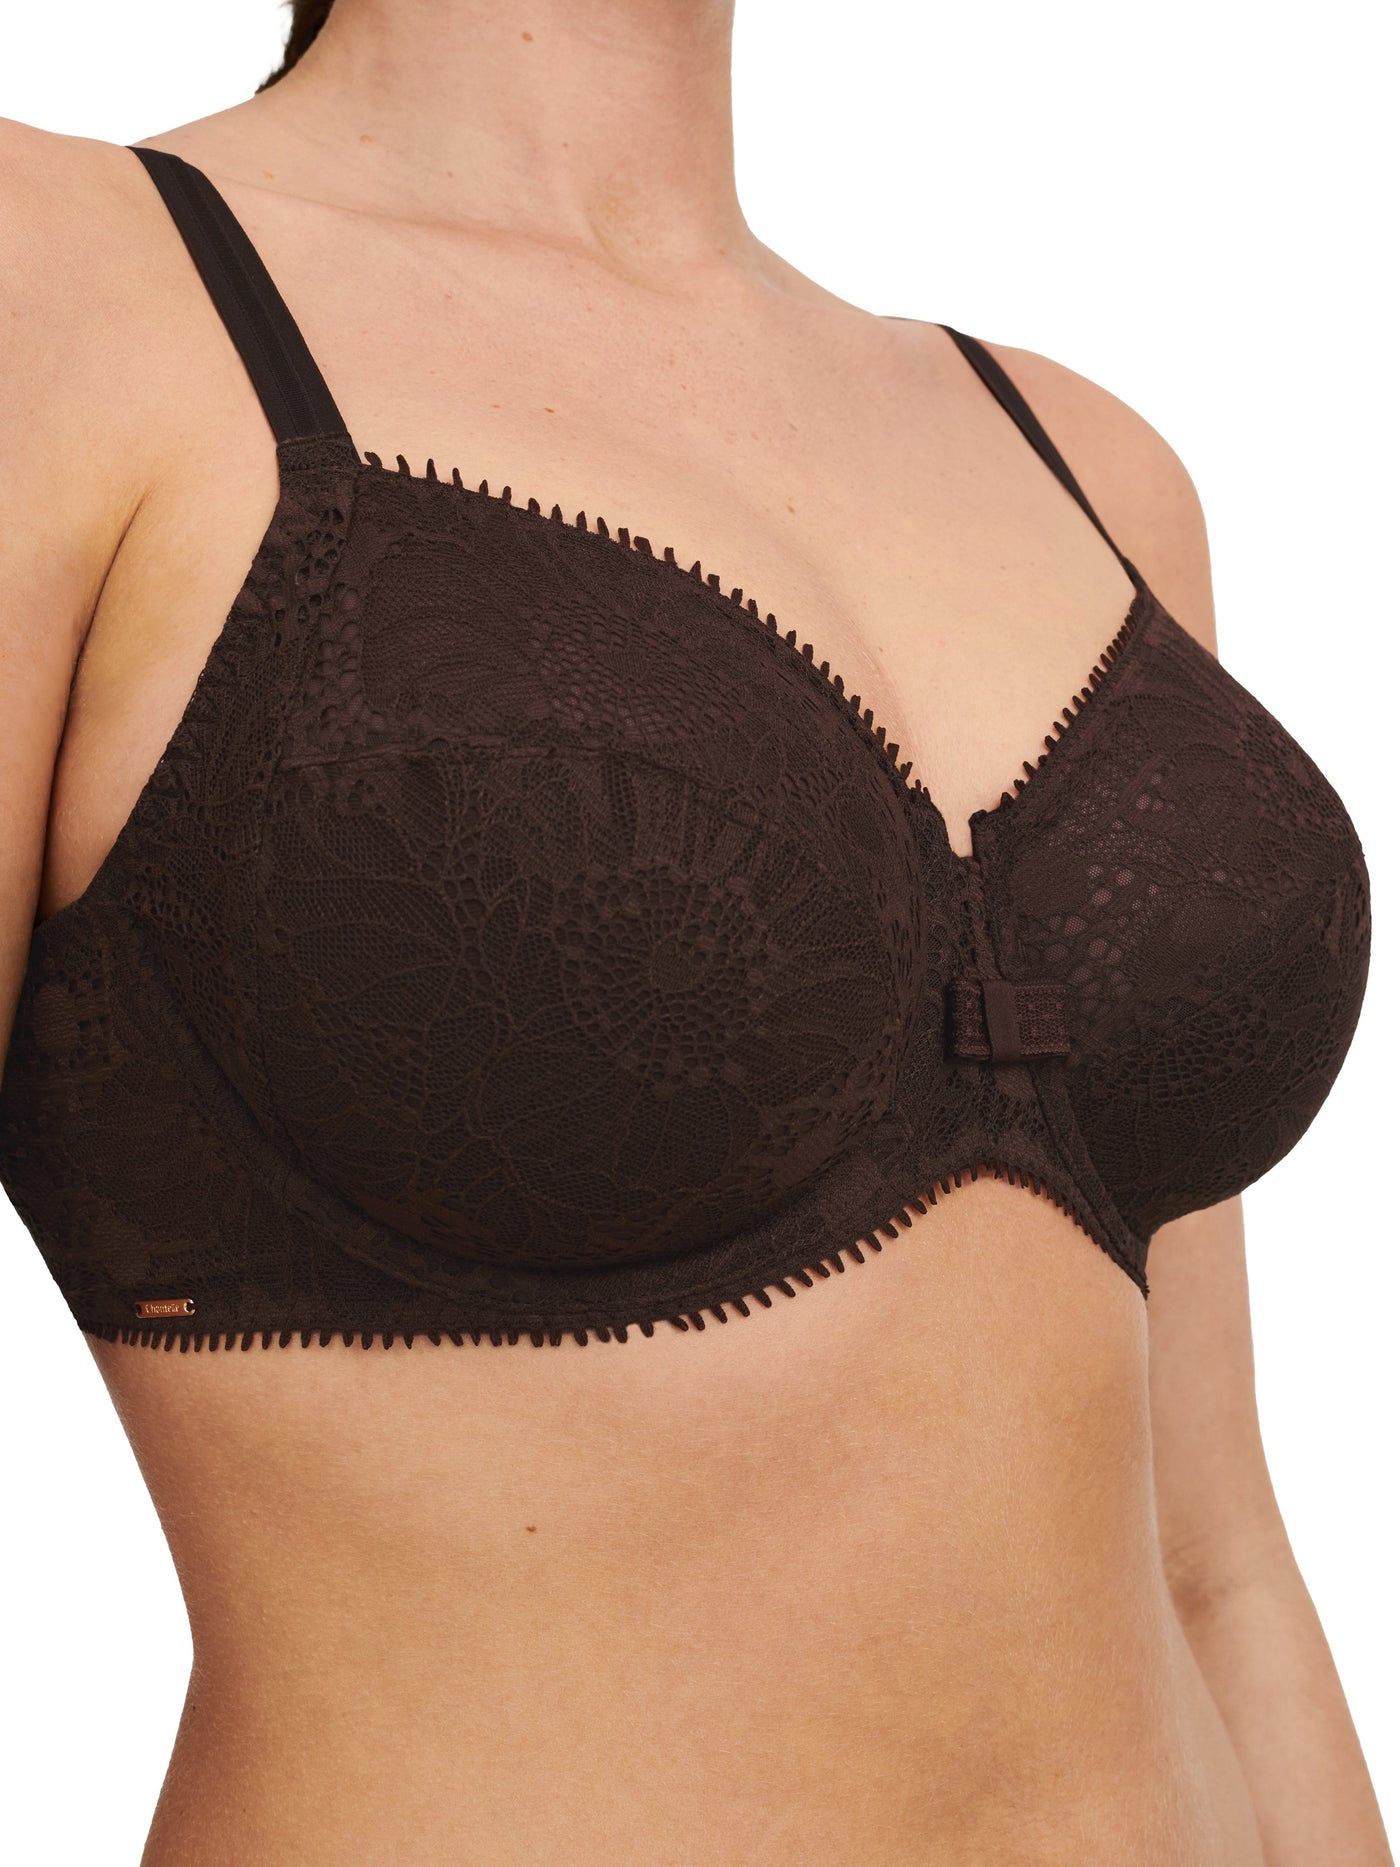 Chantelle - Day To Night Very Covering Underwired Bra Brown Full Cup Bra Chantelle 